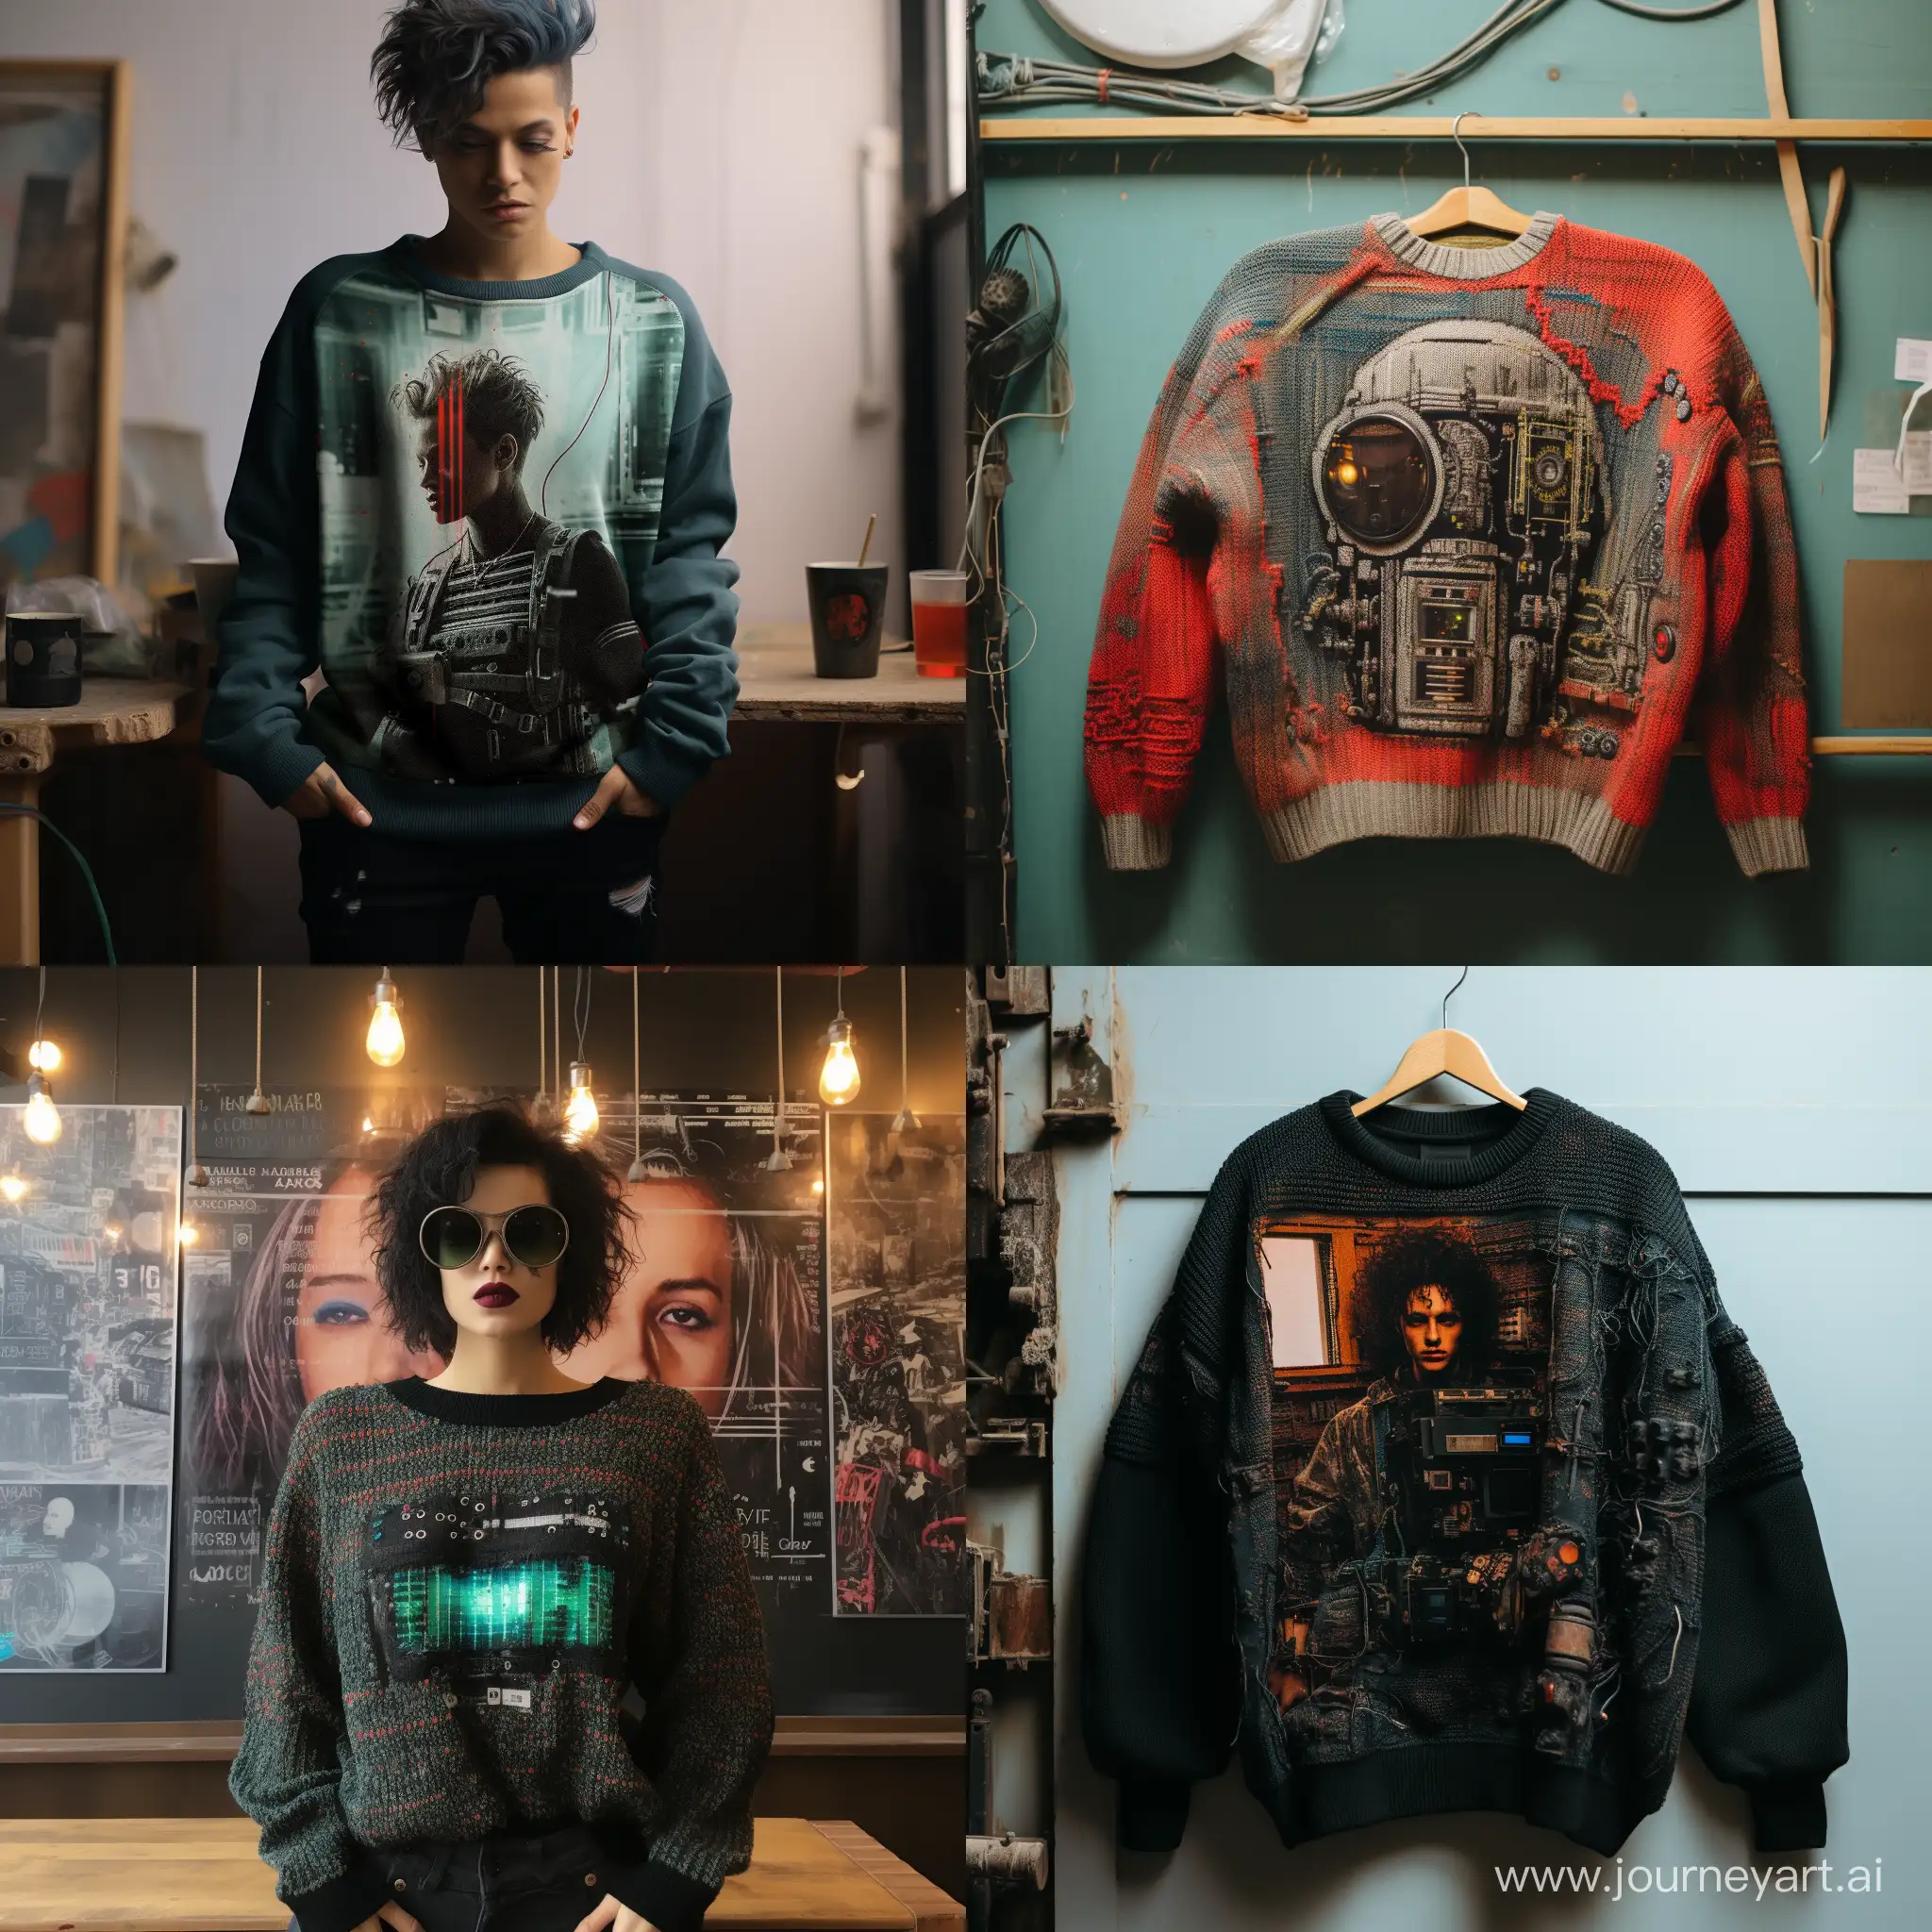 Cyberpunk-Knitted-Sweater-80s-Punk-Style-Dominated-by-Computer-Threads